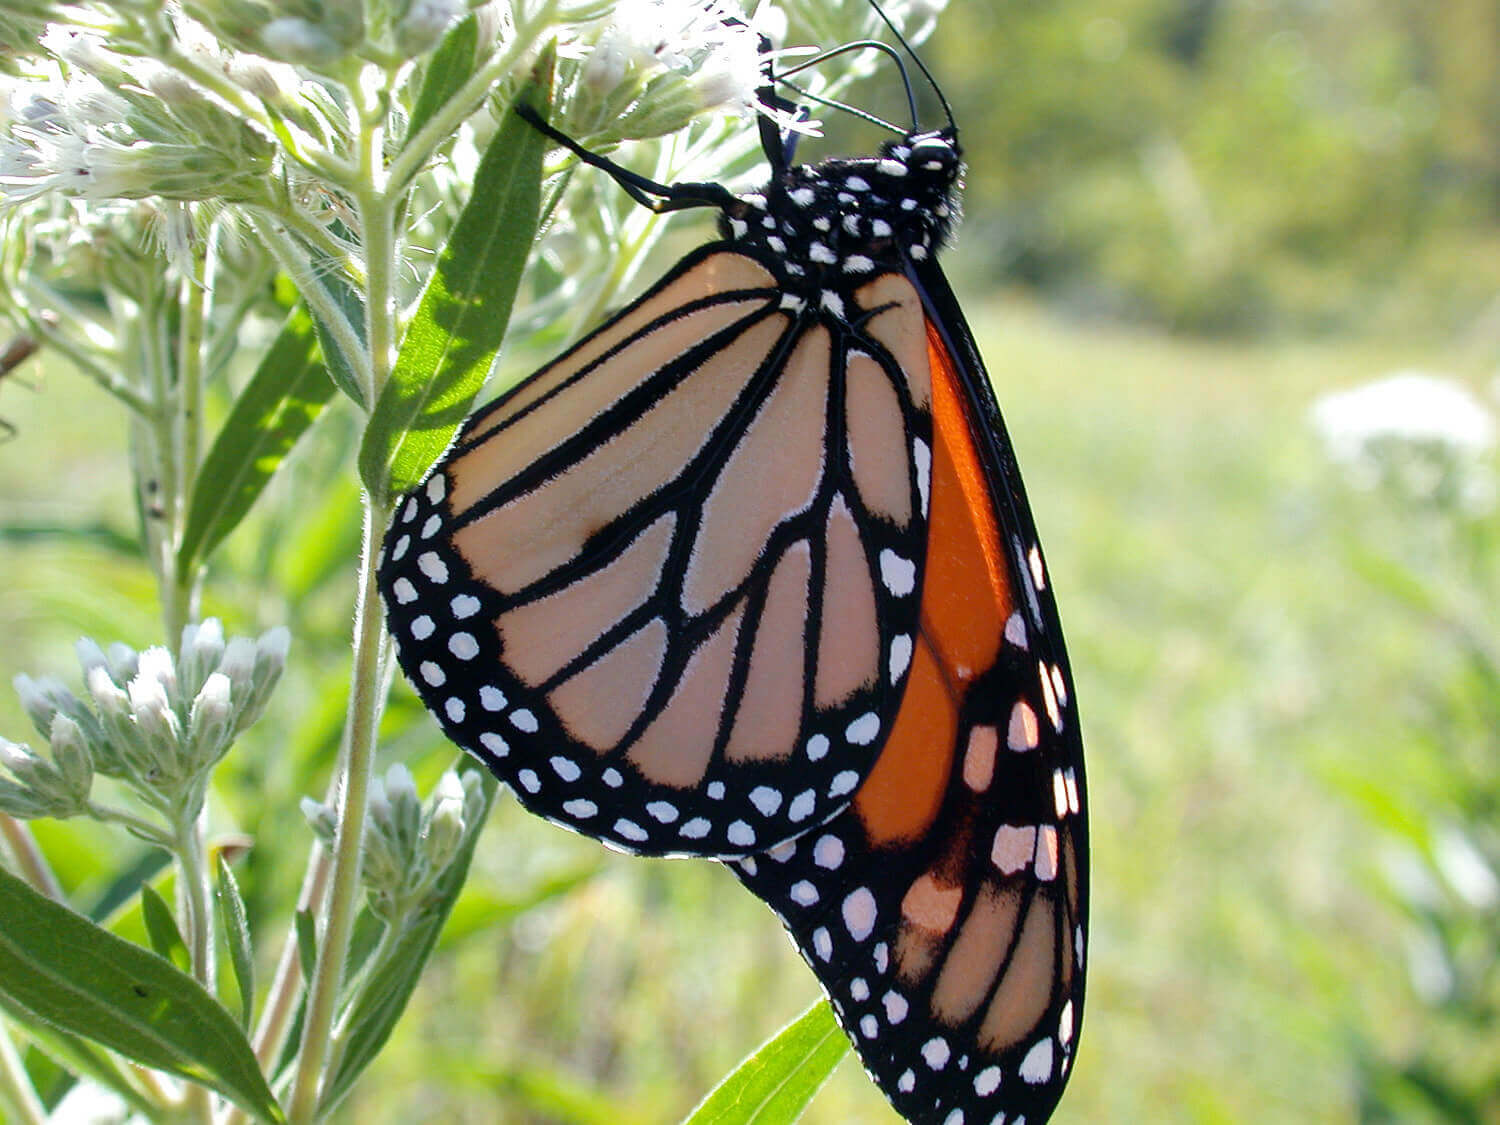 Enter for your chance to win a free Monarch Butterfly Kit